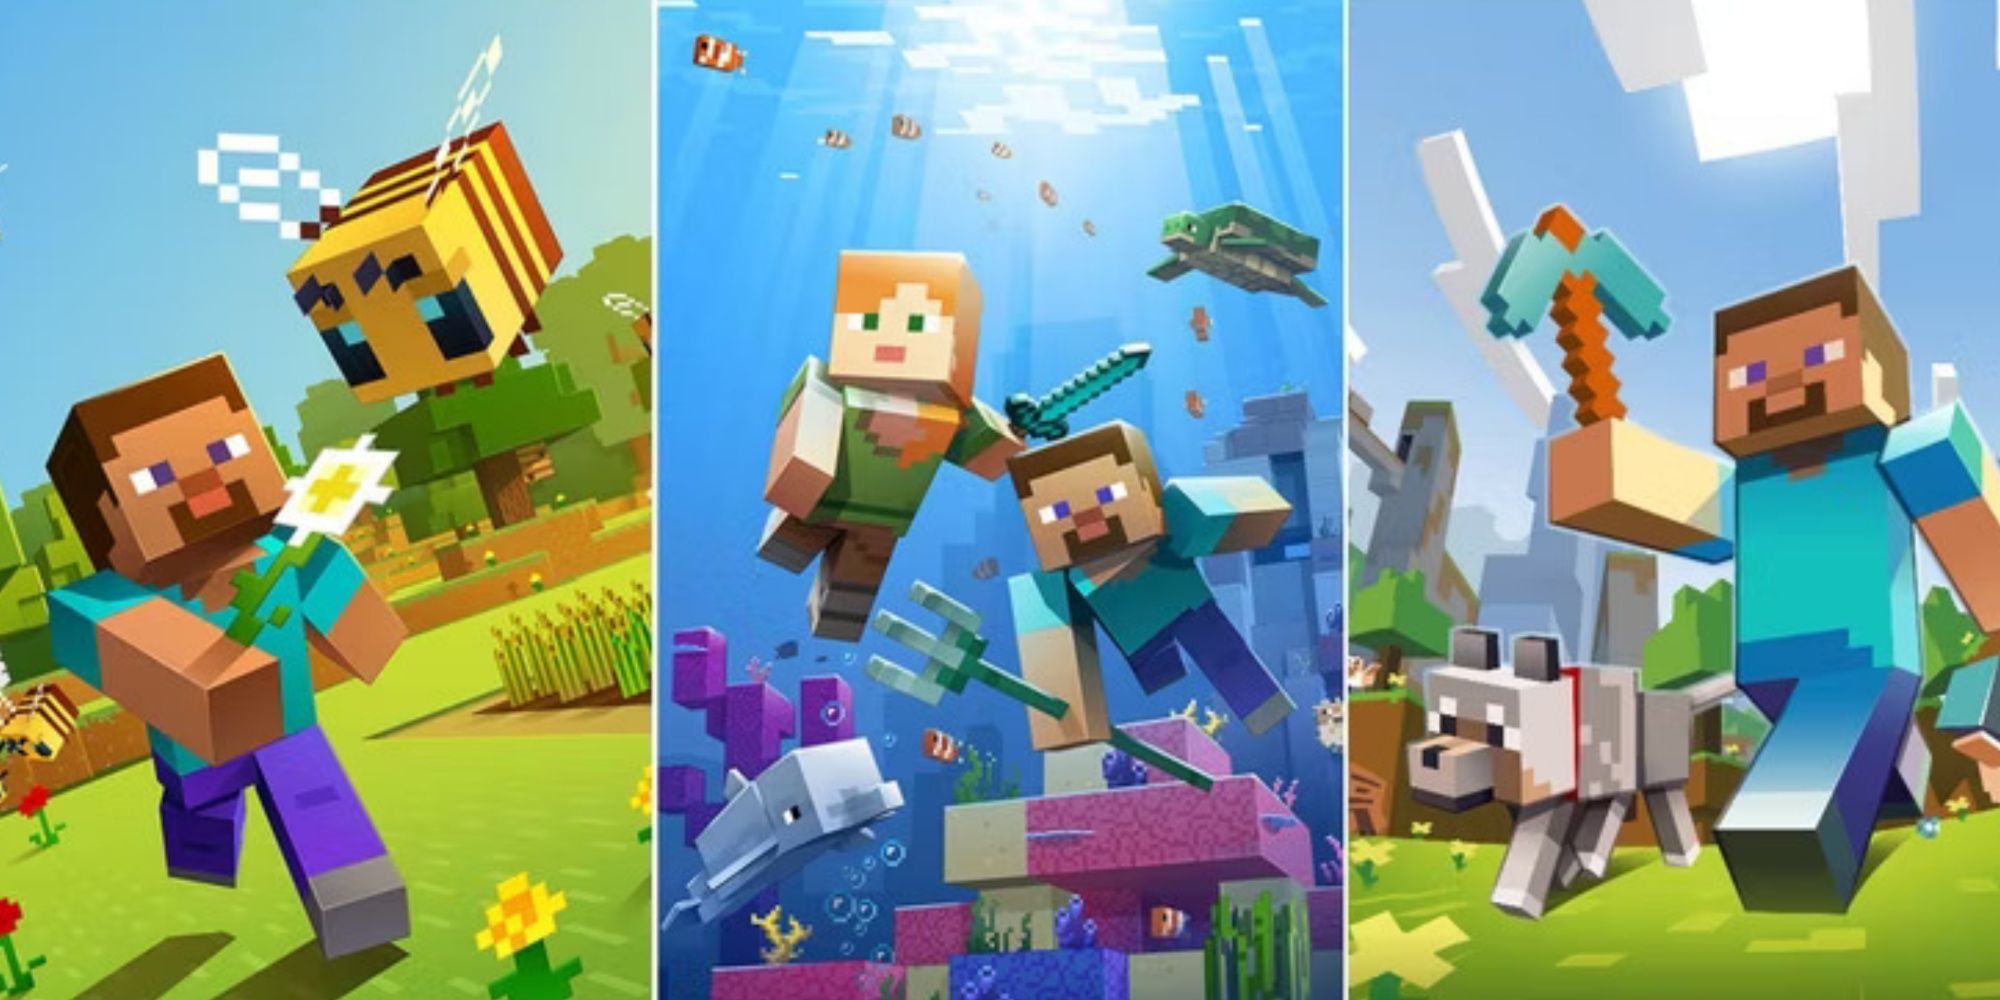 Split images of official Minecraft art with Steve and Alex